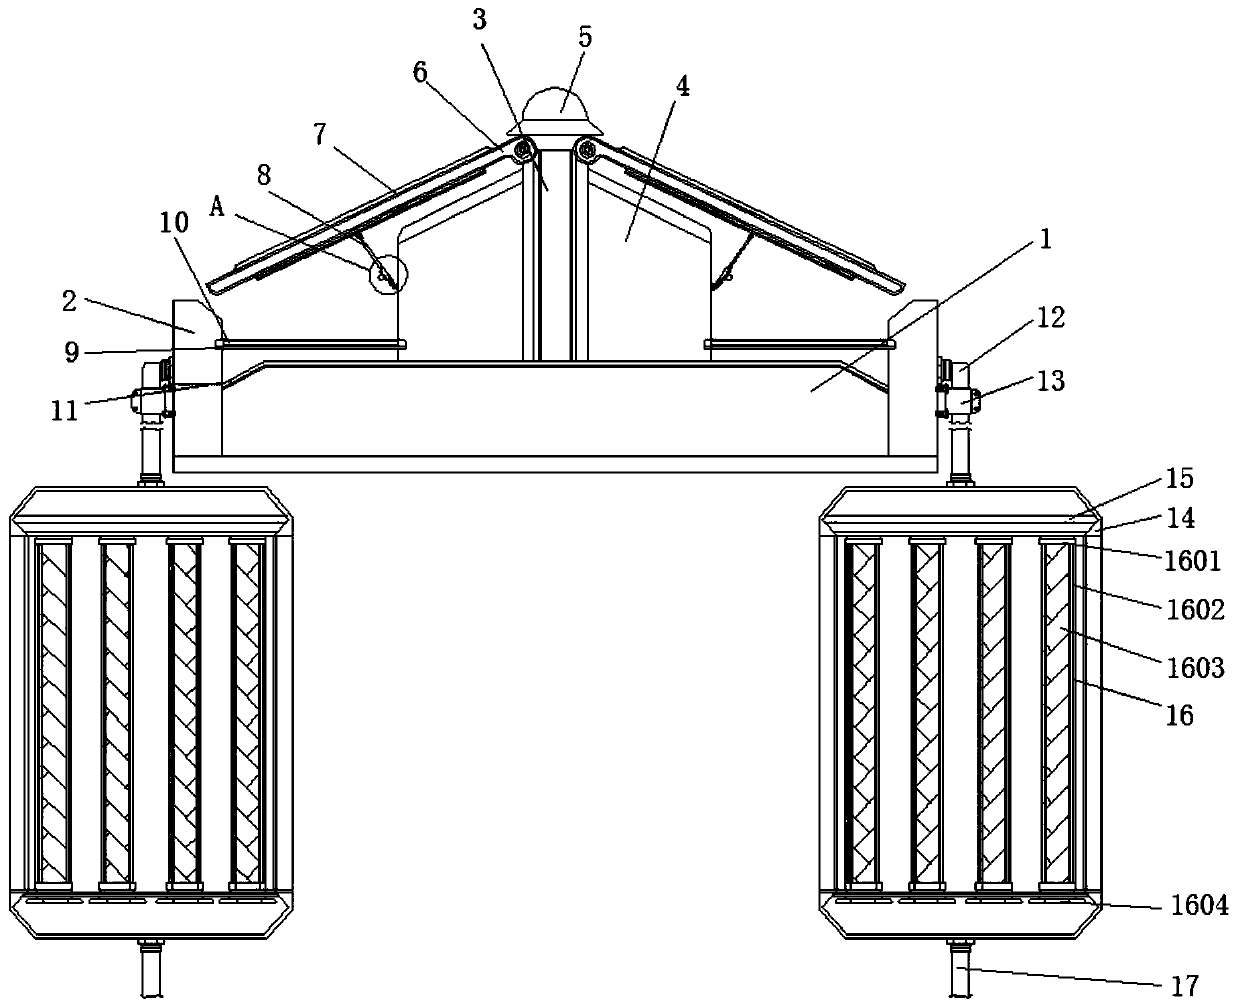 Filter-type rainwater collection device for green building